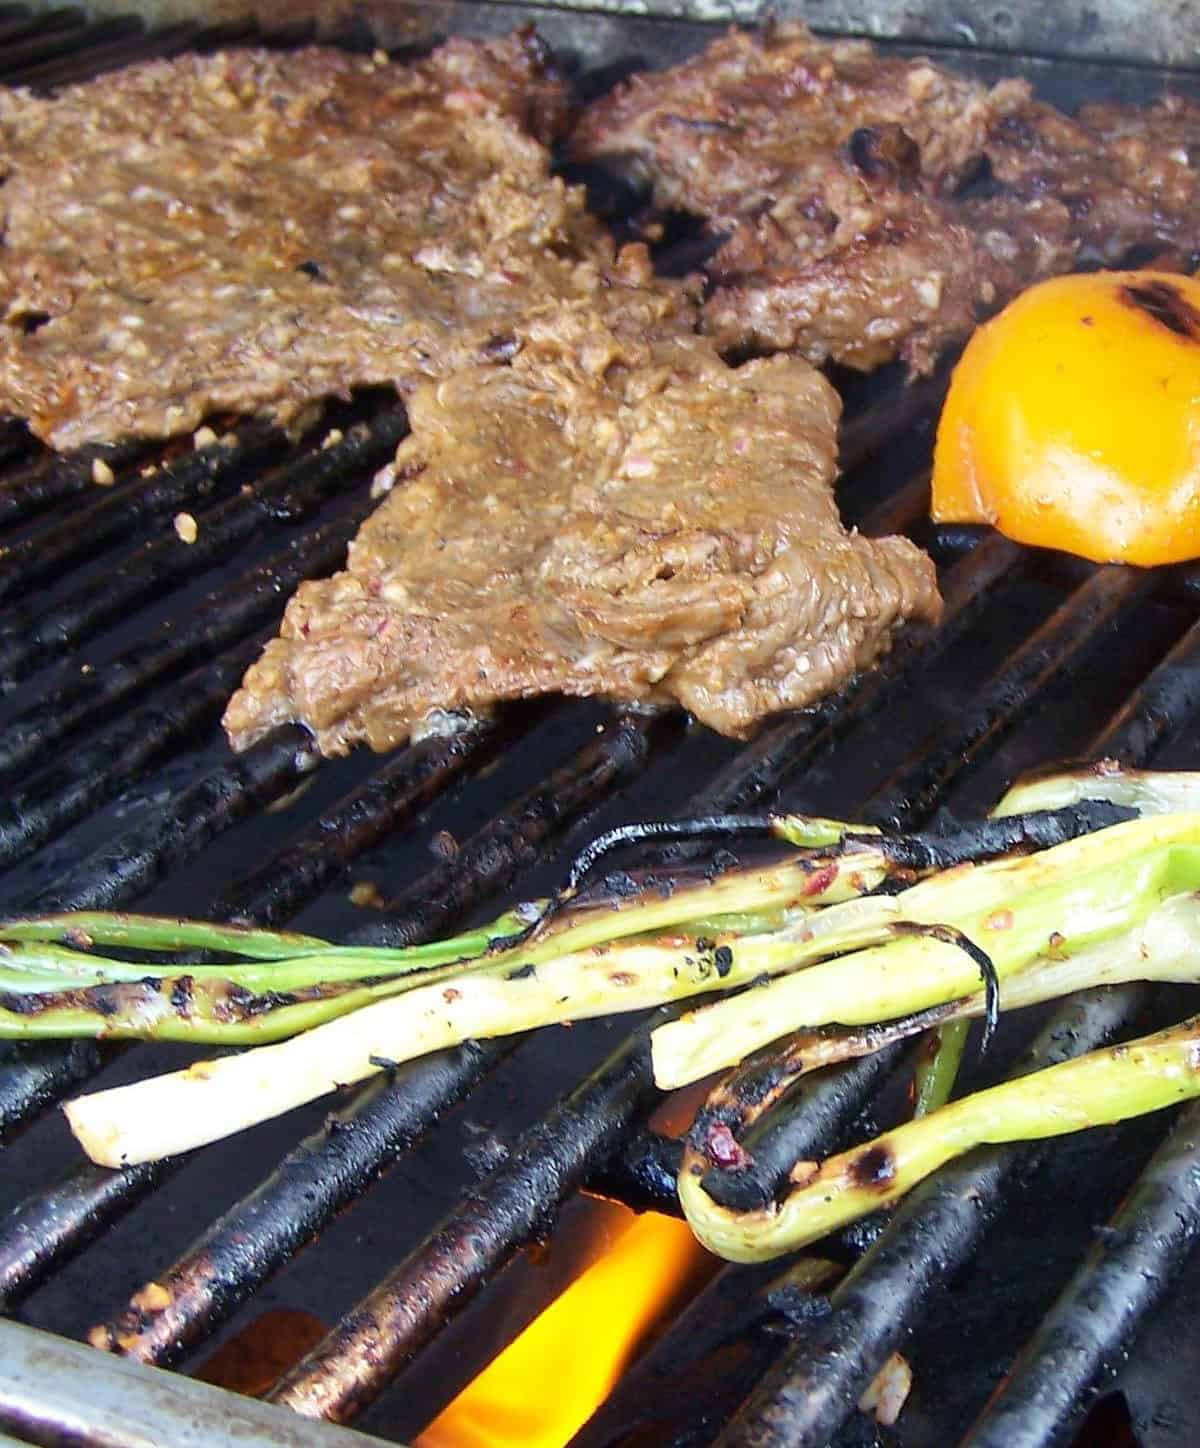  Sizzle, sear, and soak in the sun with this Cuban skirt steak recipe!